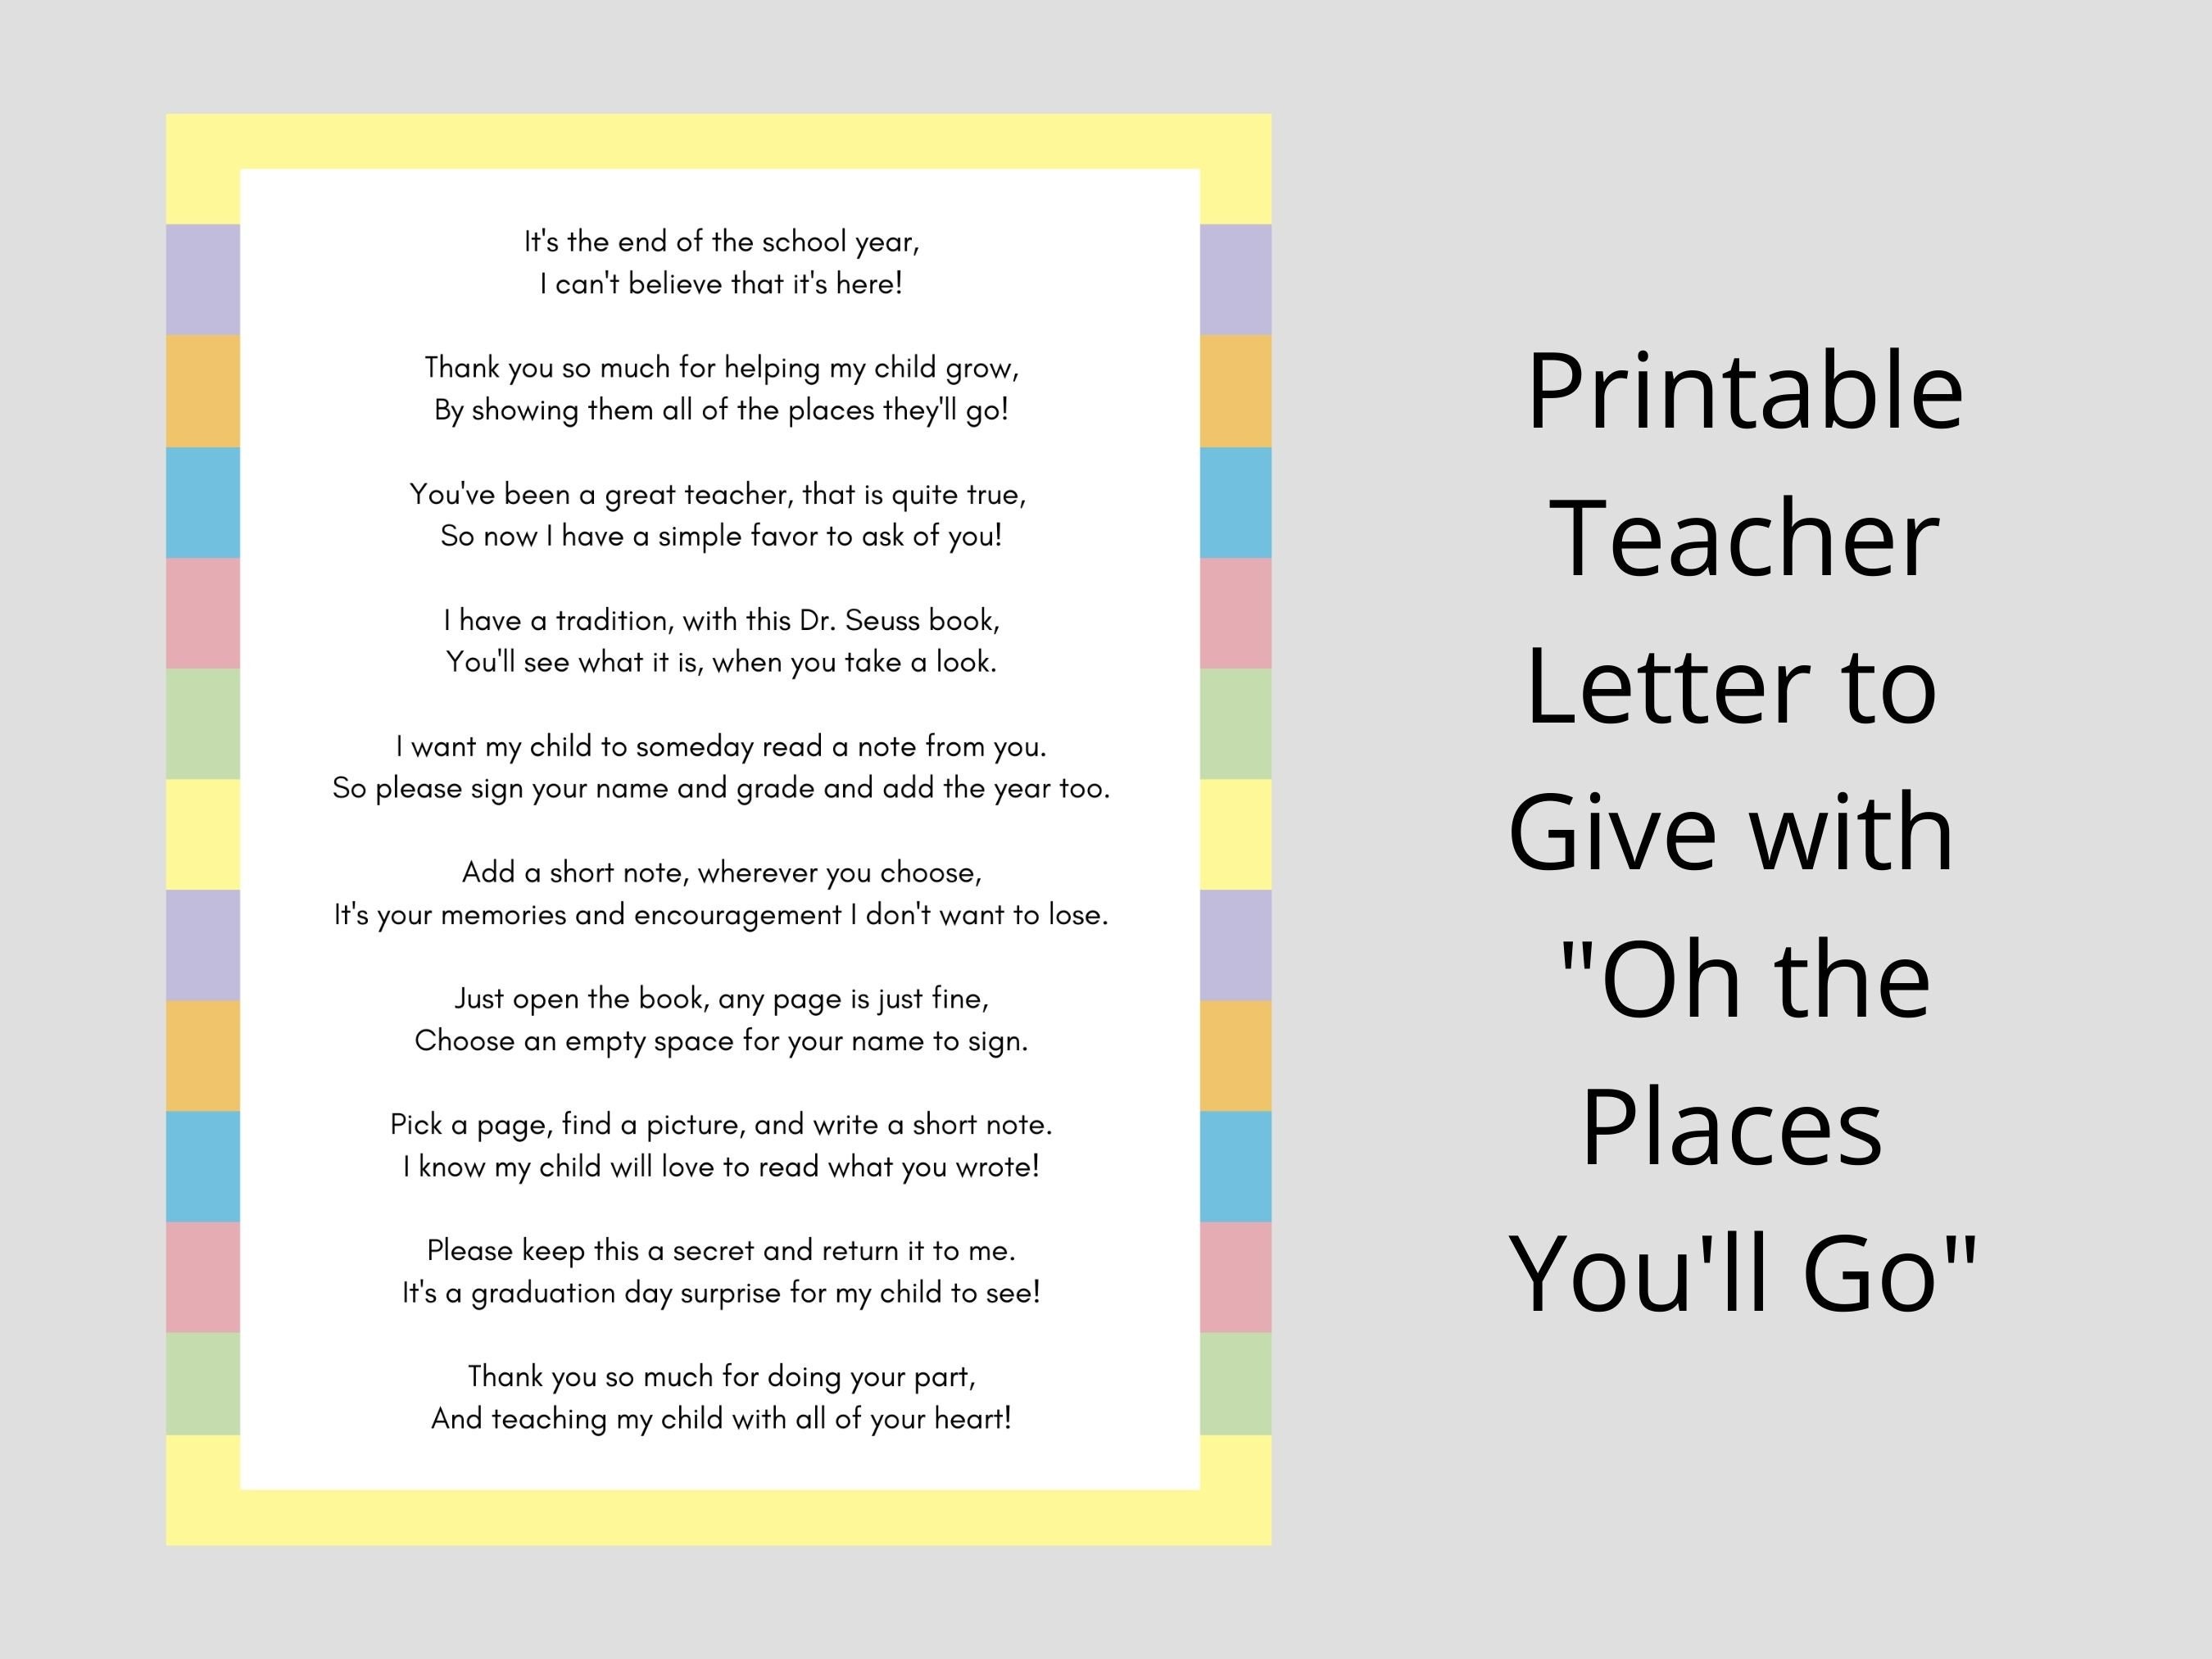 teacher-letter-for-oh-the-places-you-ll-go-by-dr-seuss-etsy-australia